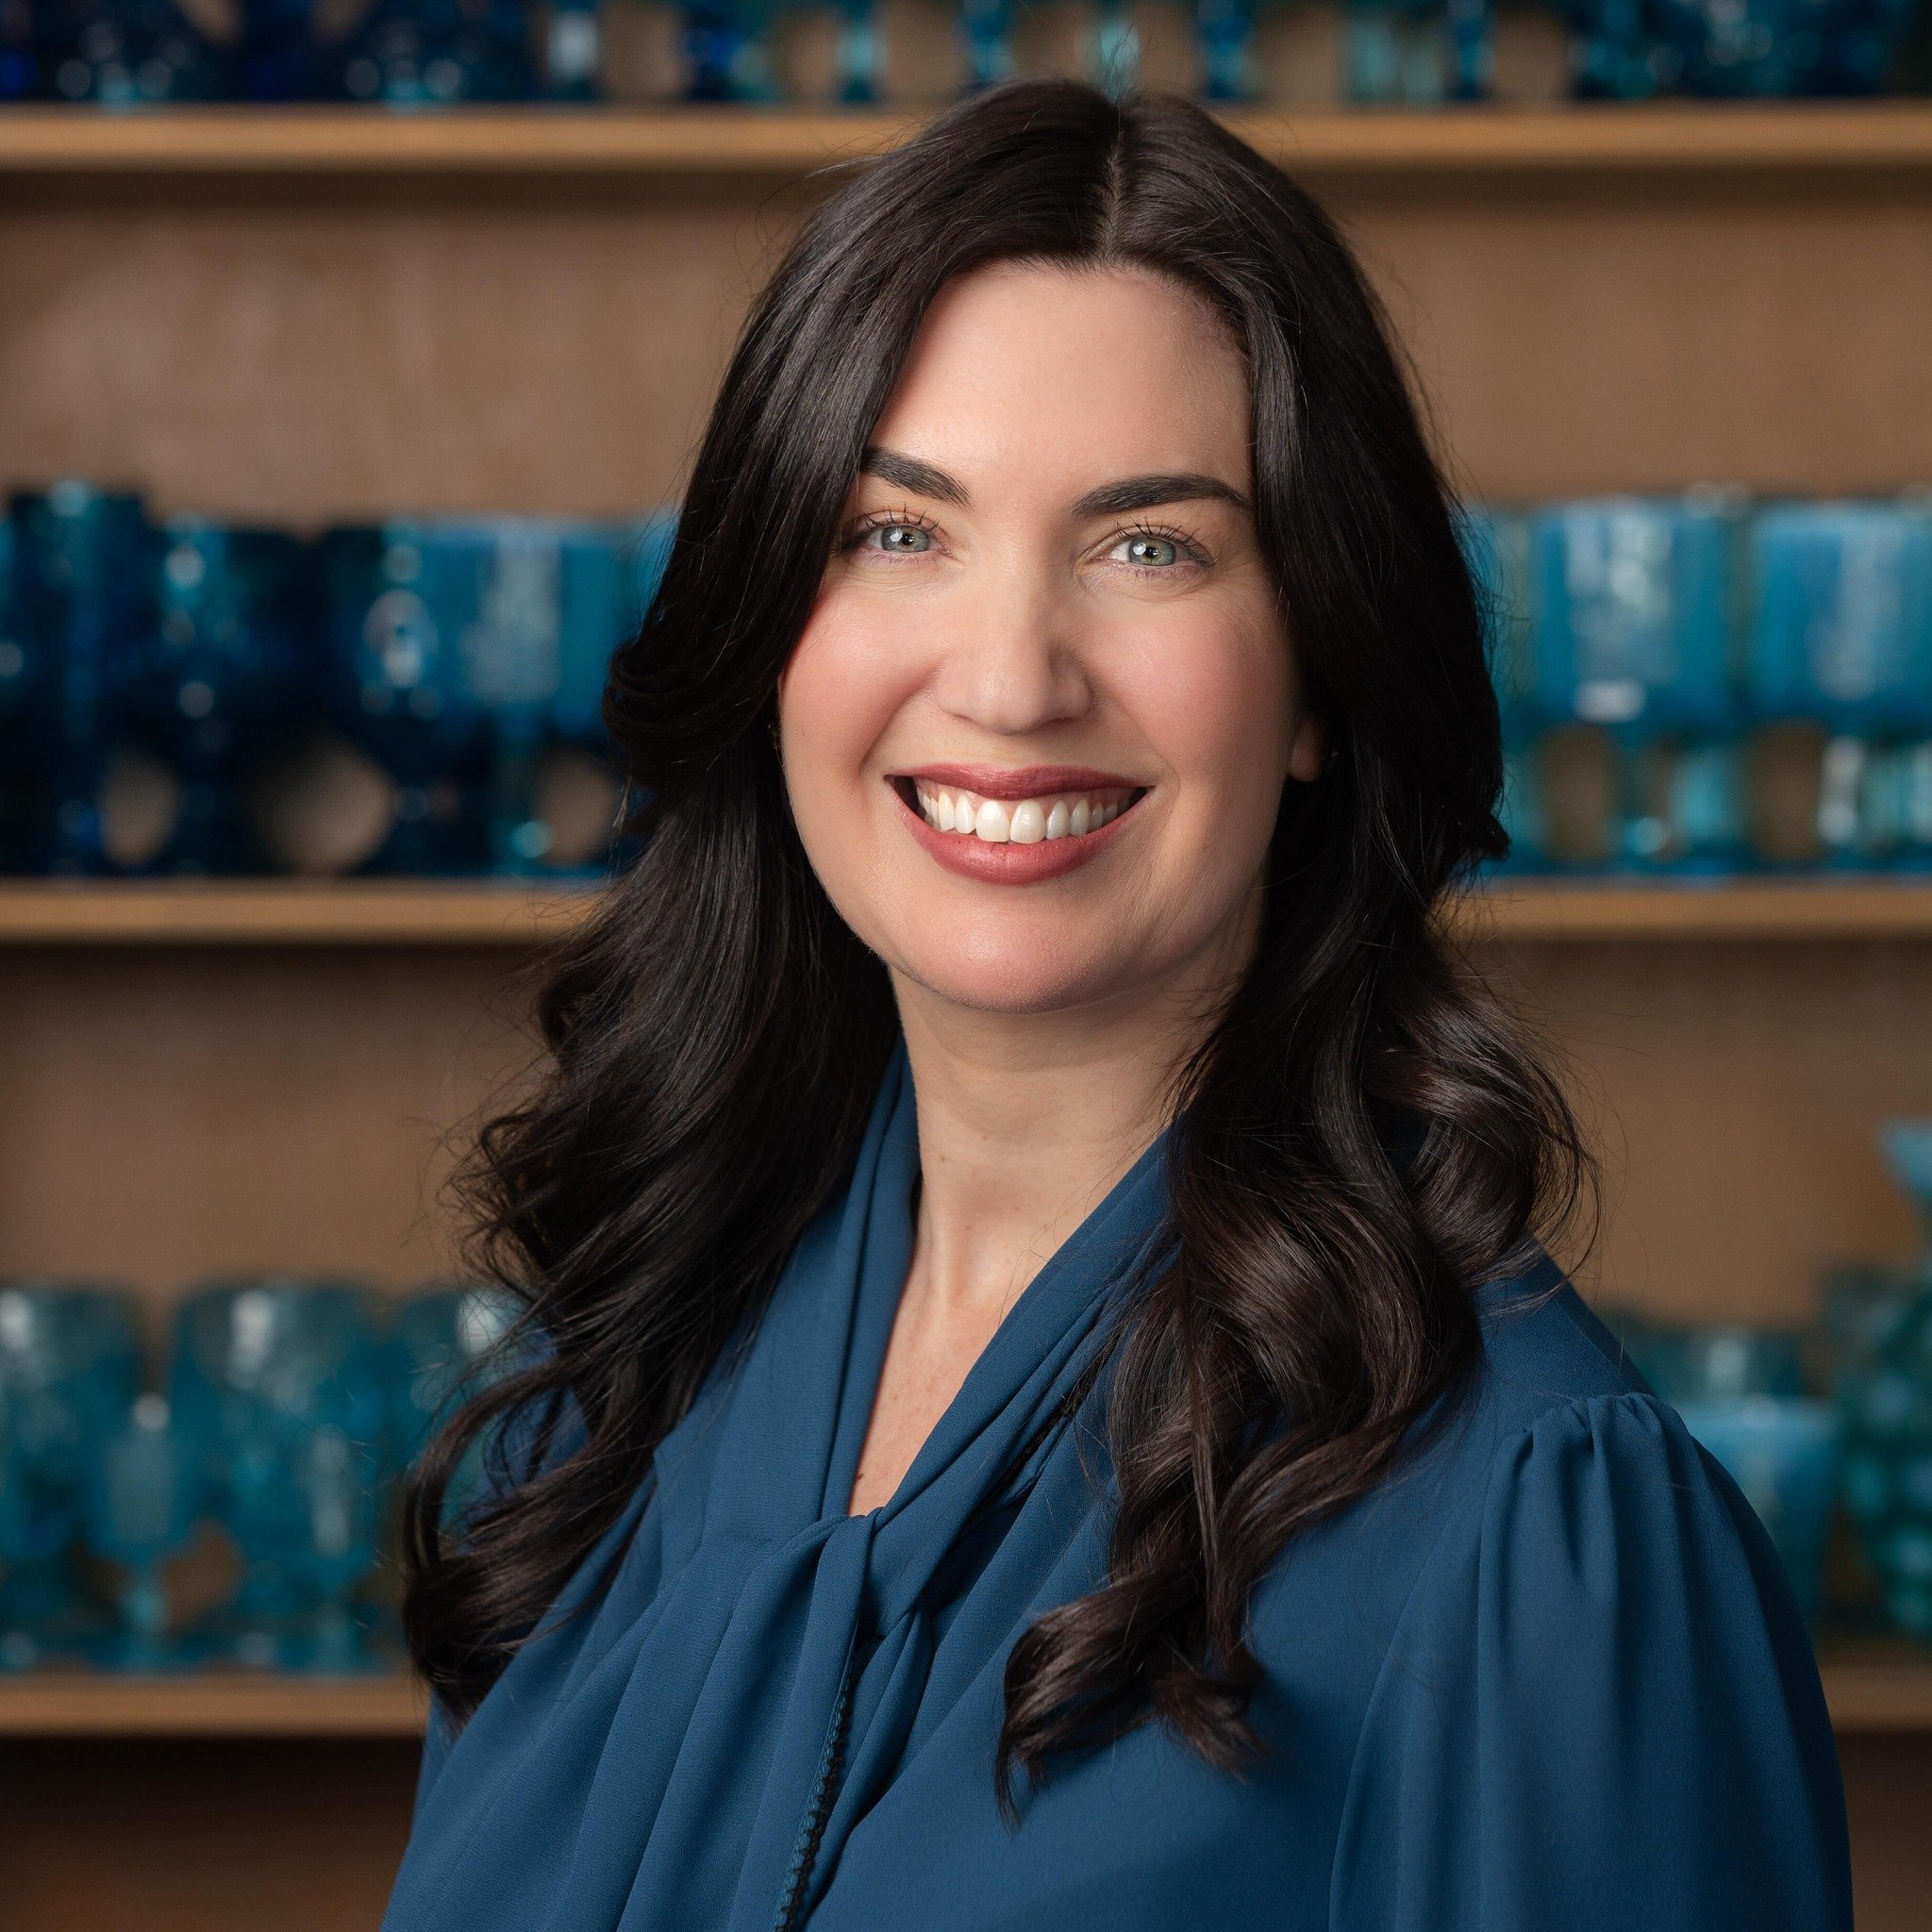 A stunning headshot to share of a recent client @backcountrymercantile .  If you are not following Amanda make sure you start.  Her store carries gorgeous hand painted ceramics, bespoke porcelain and vintage tableware.

I had a wonderful time taking 